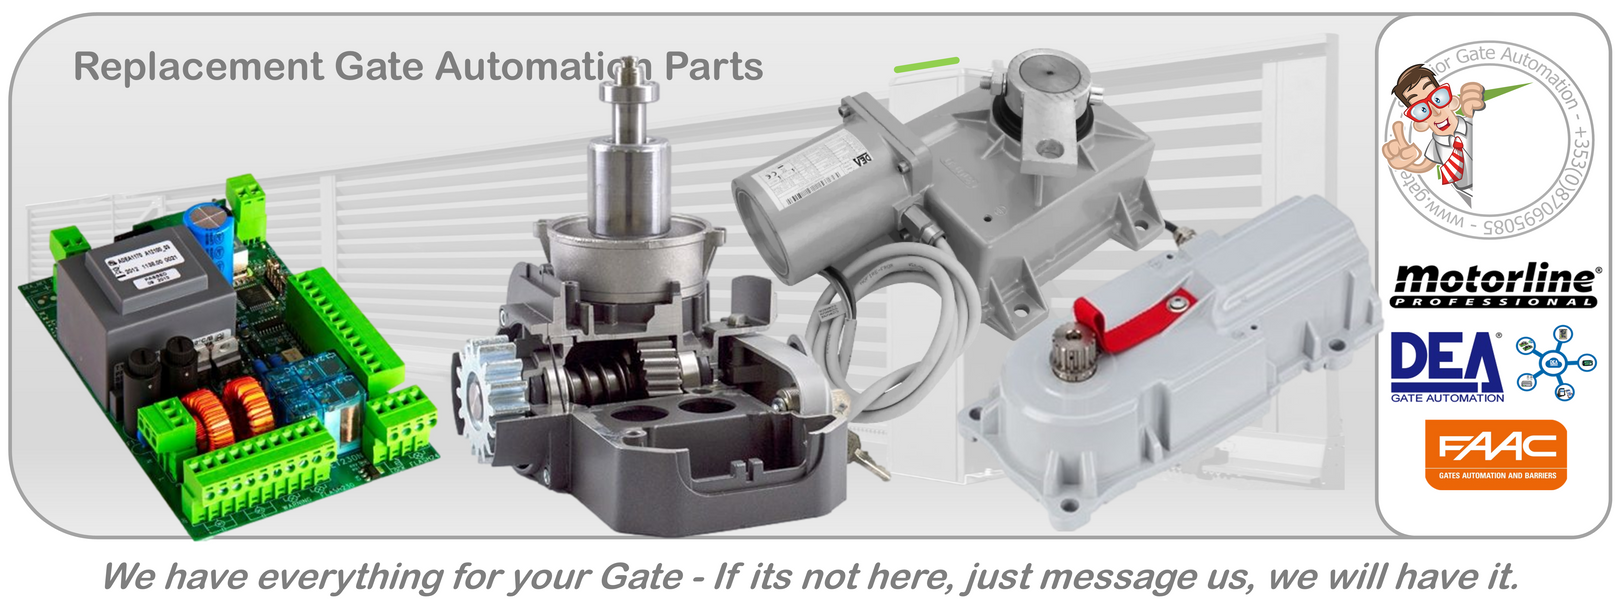 Replacement Gate Automation Parts